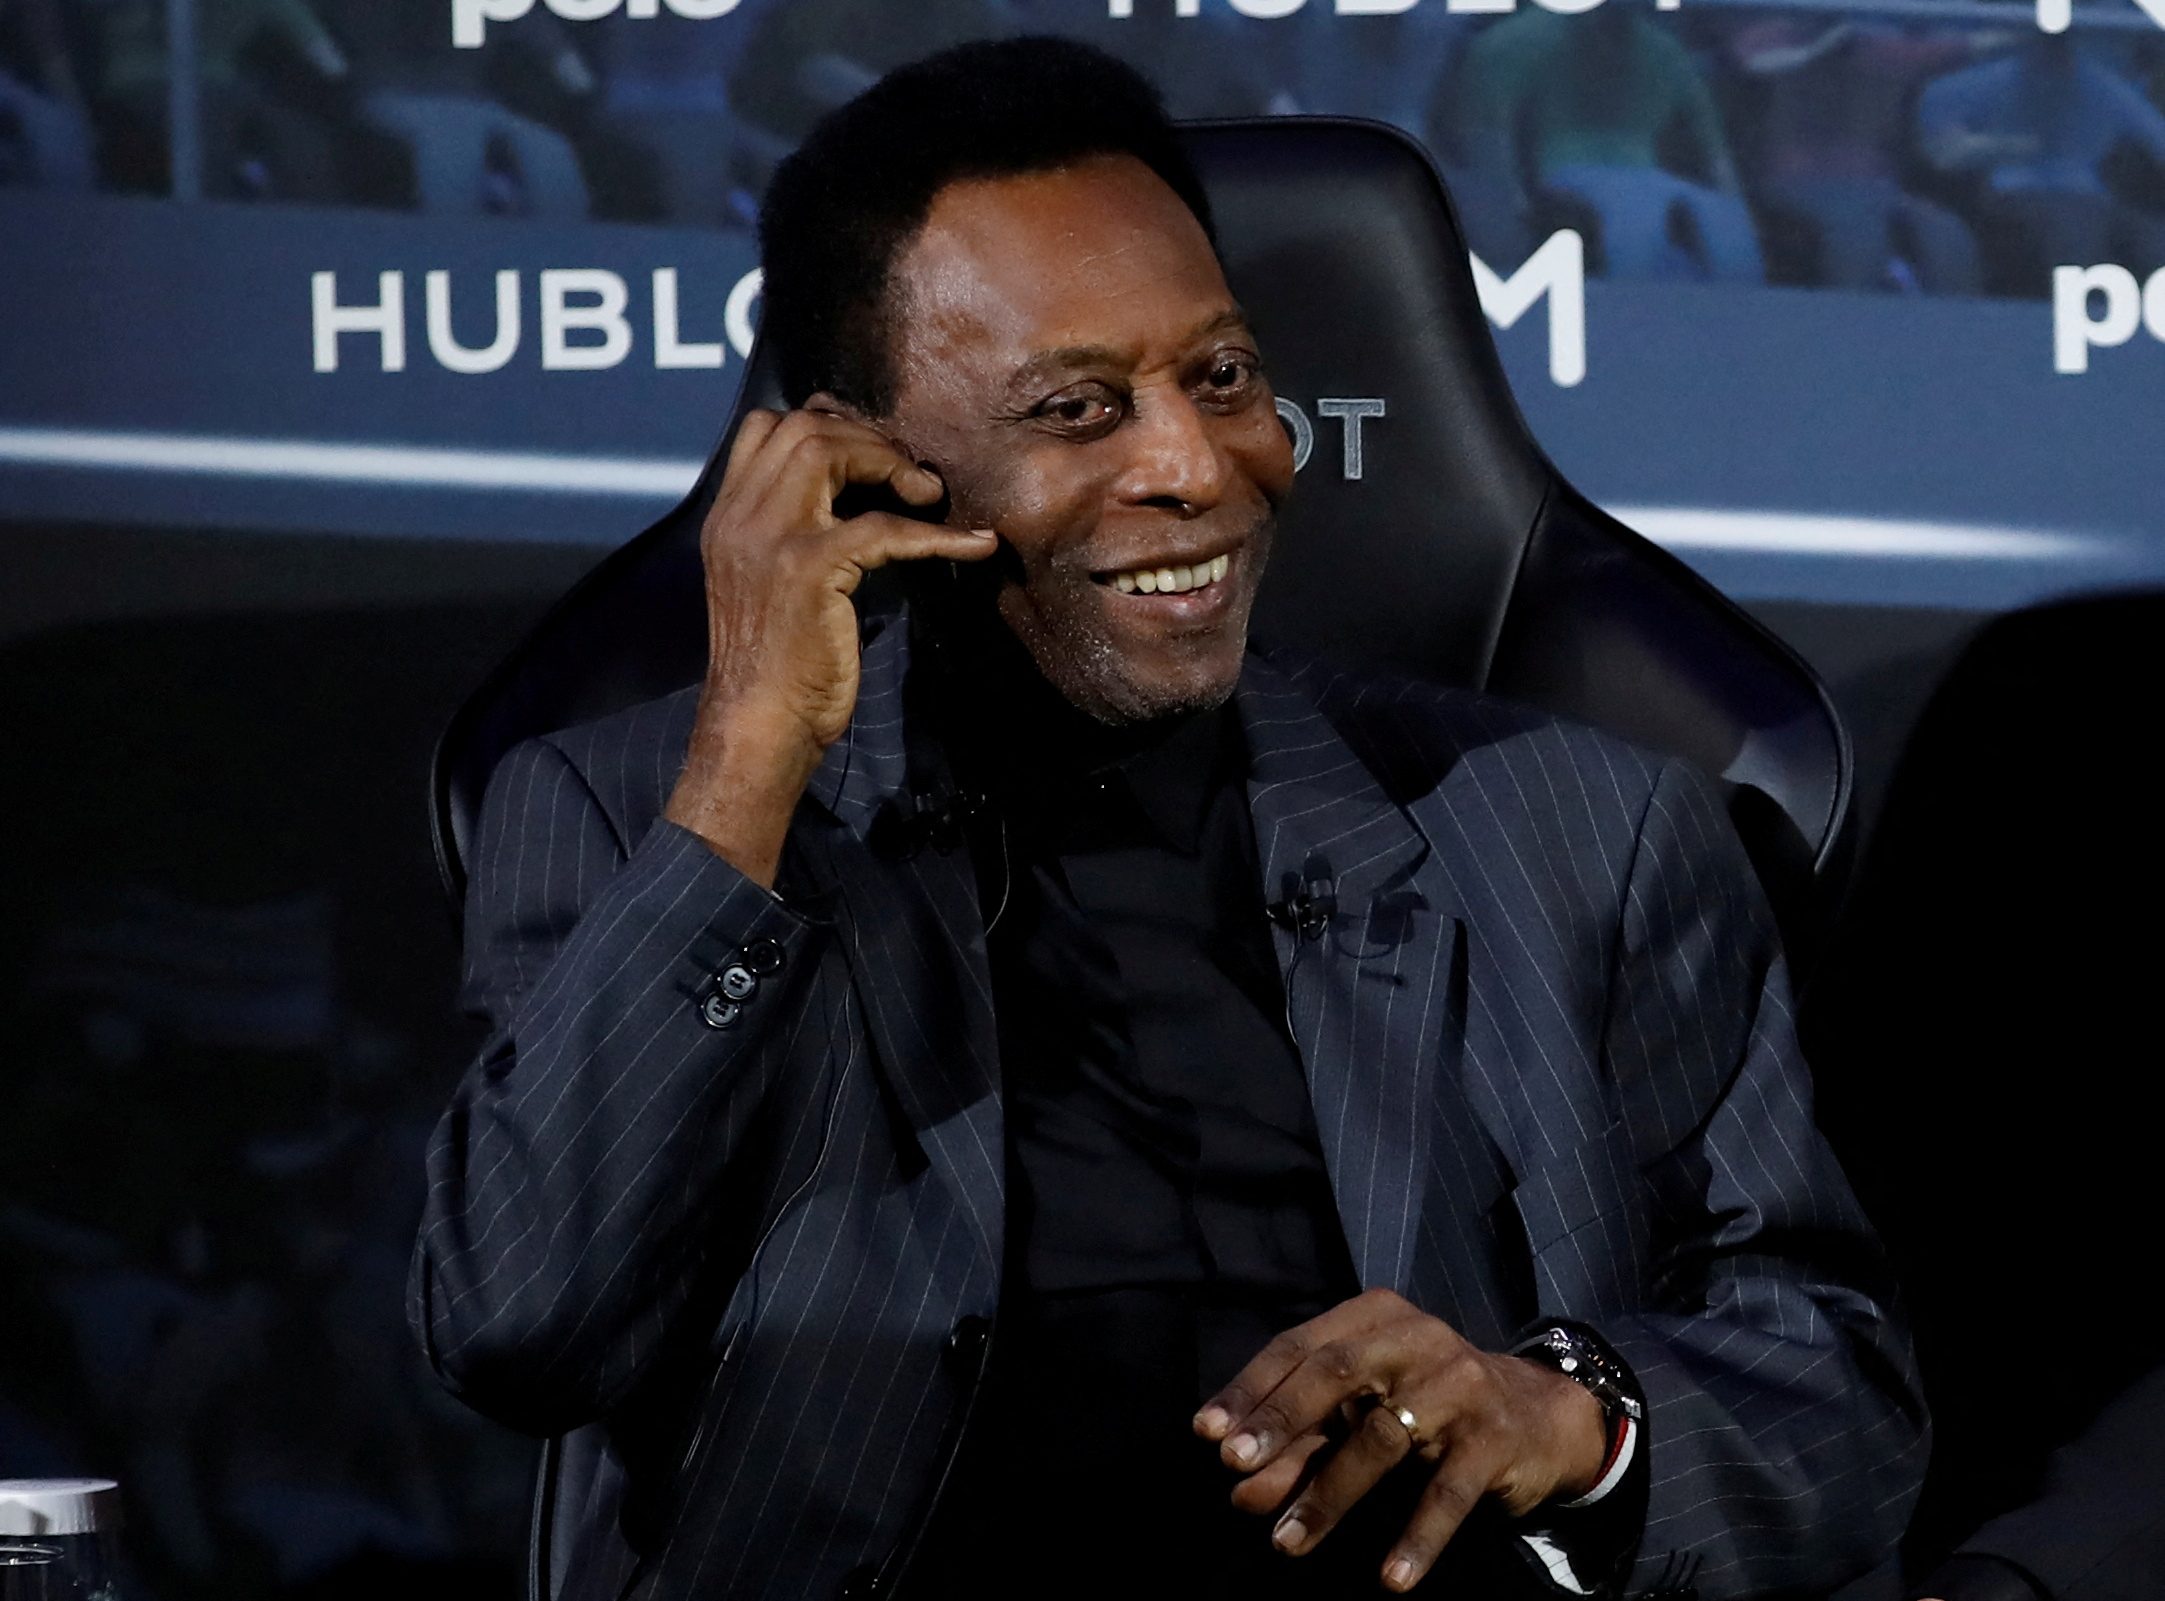 Pele discharged from hospital, will spend Christmas with family